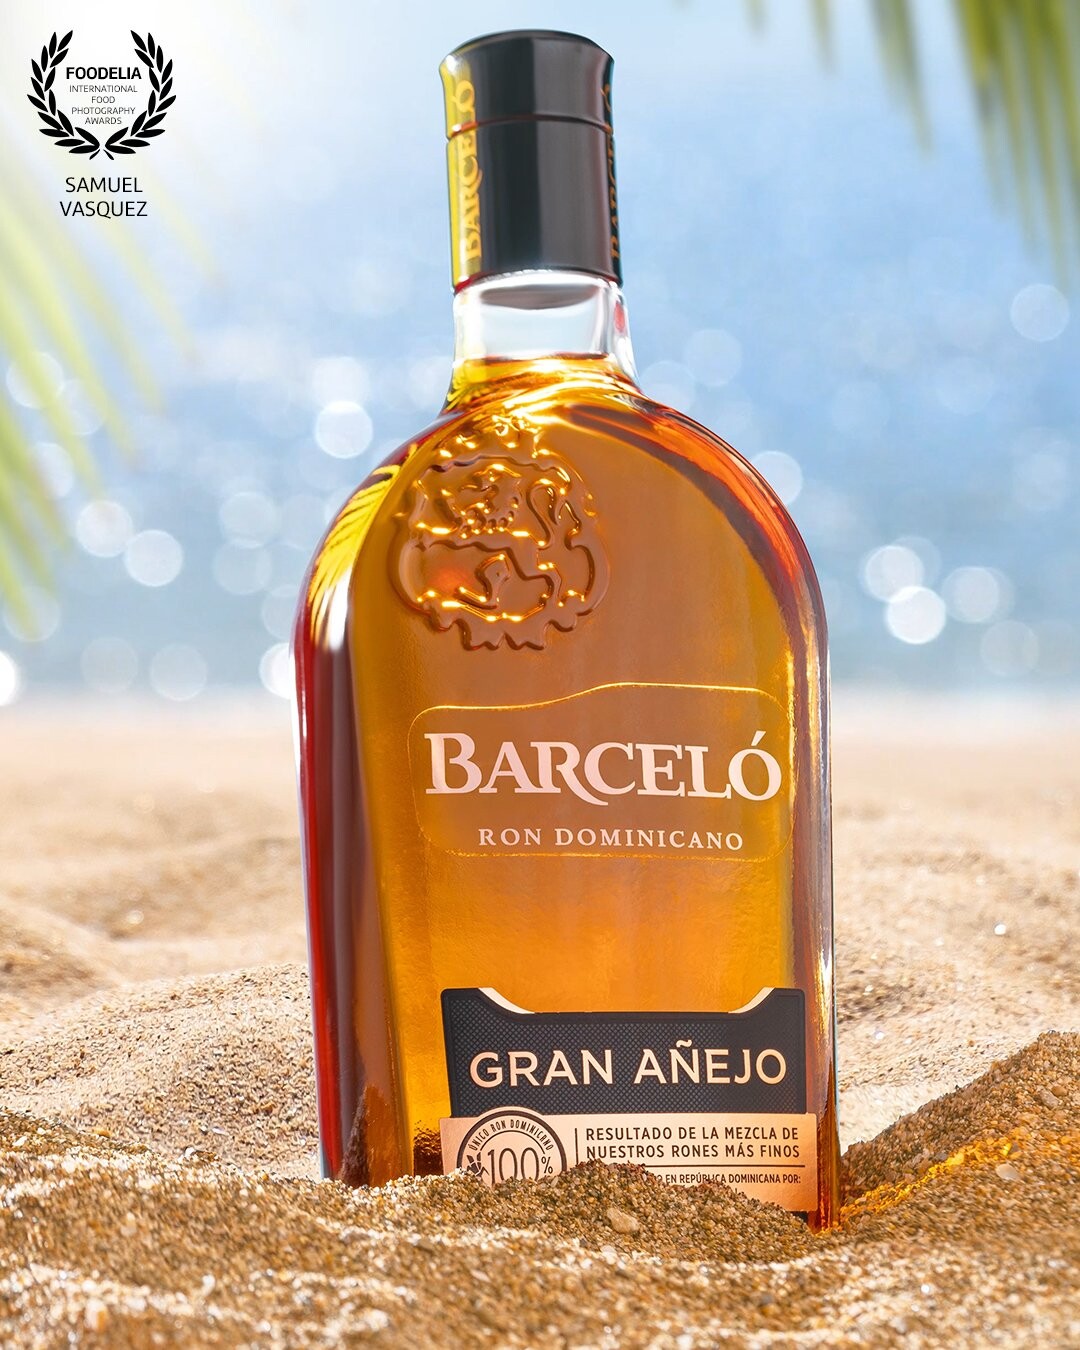 Made entirely in studio with real sand and a tv screen for the background. Palm leaves were added in post but we had them on set to create the reflections on the bottle.